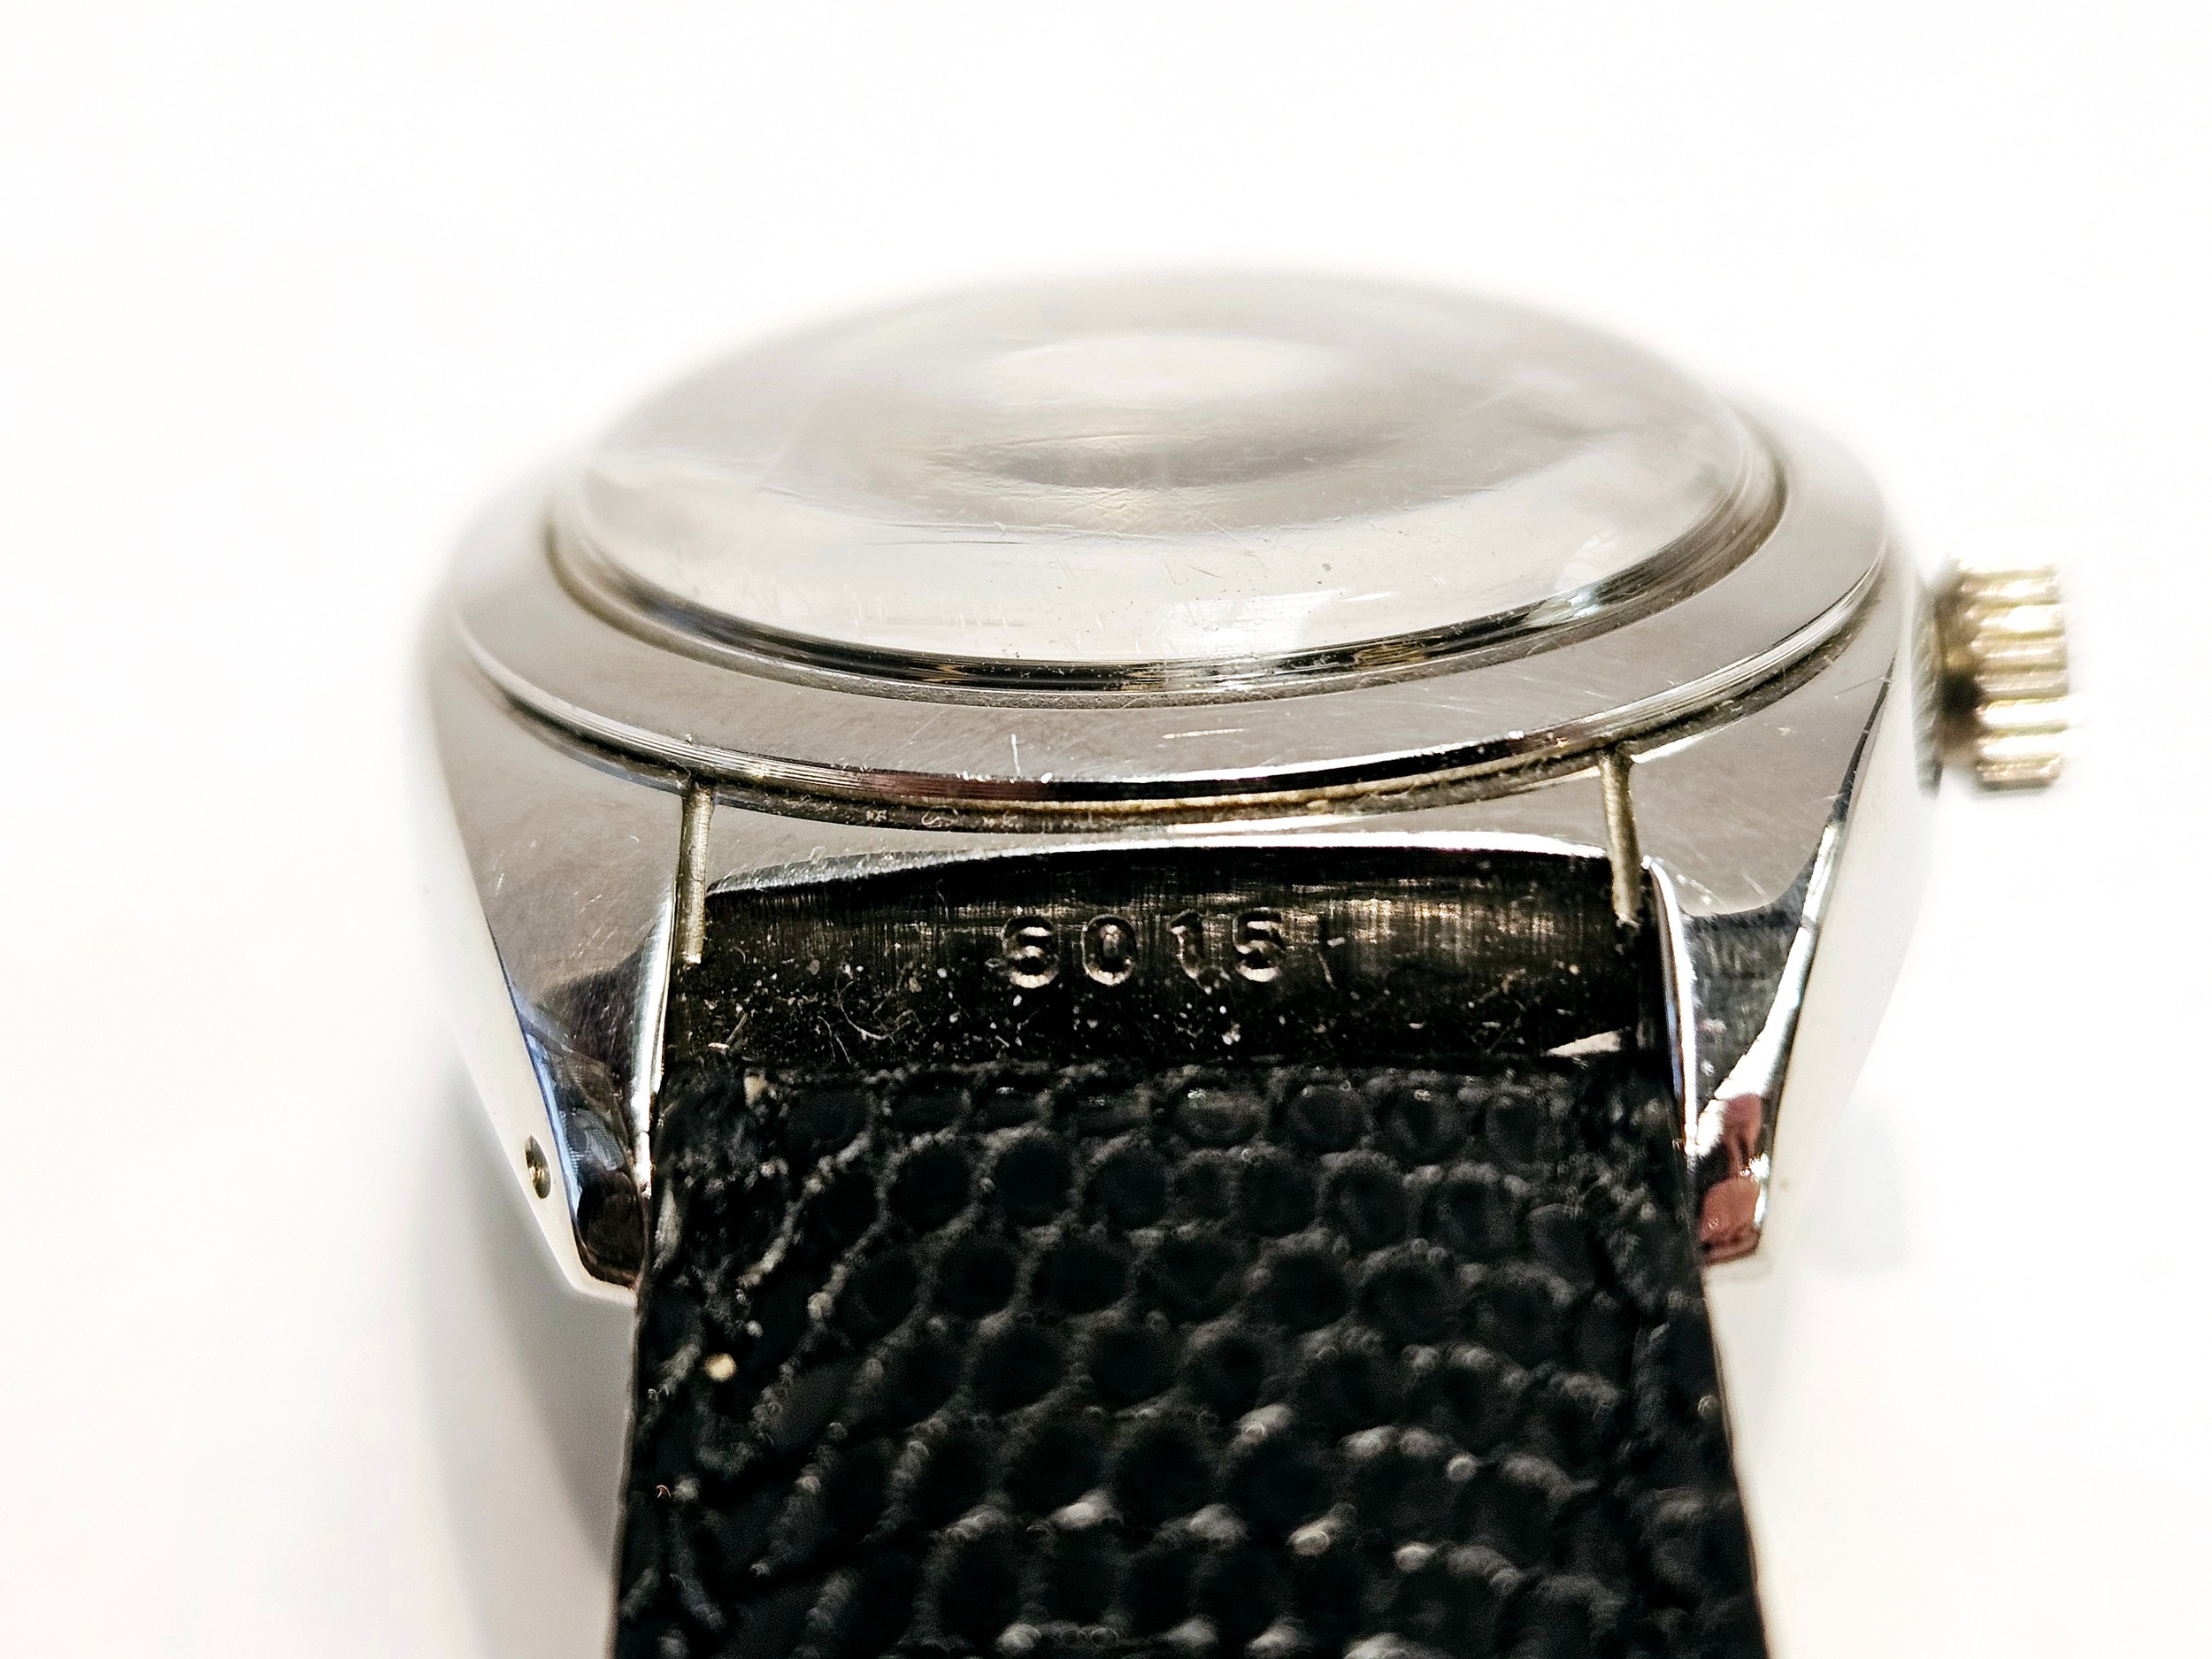 Circa 1950s Rolex Oyster Perpetual with black dial and bubble back, No. 5015, 545383 on leather - Image 3 of 7